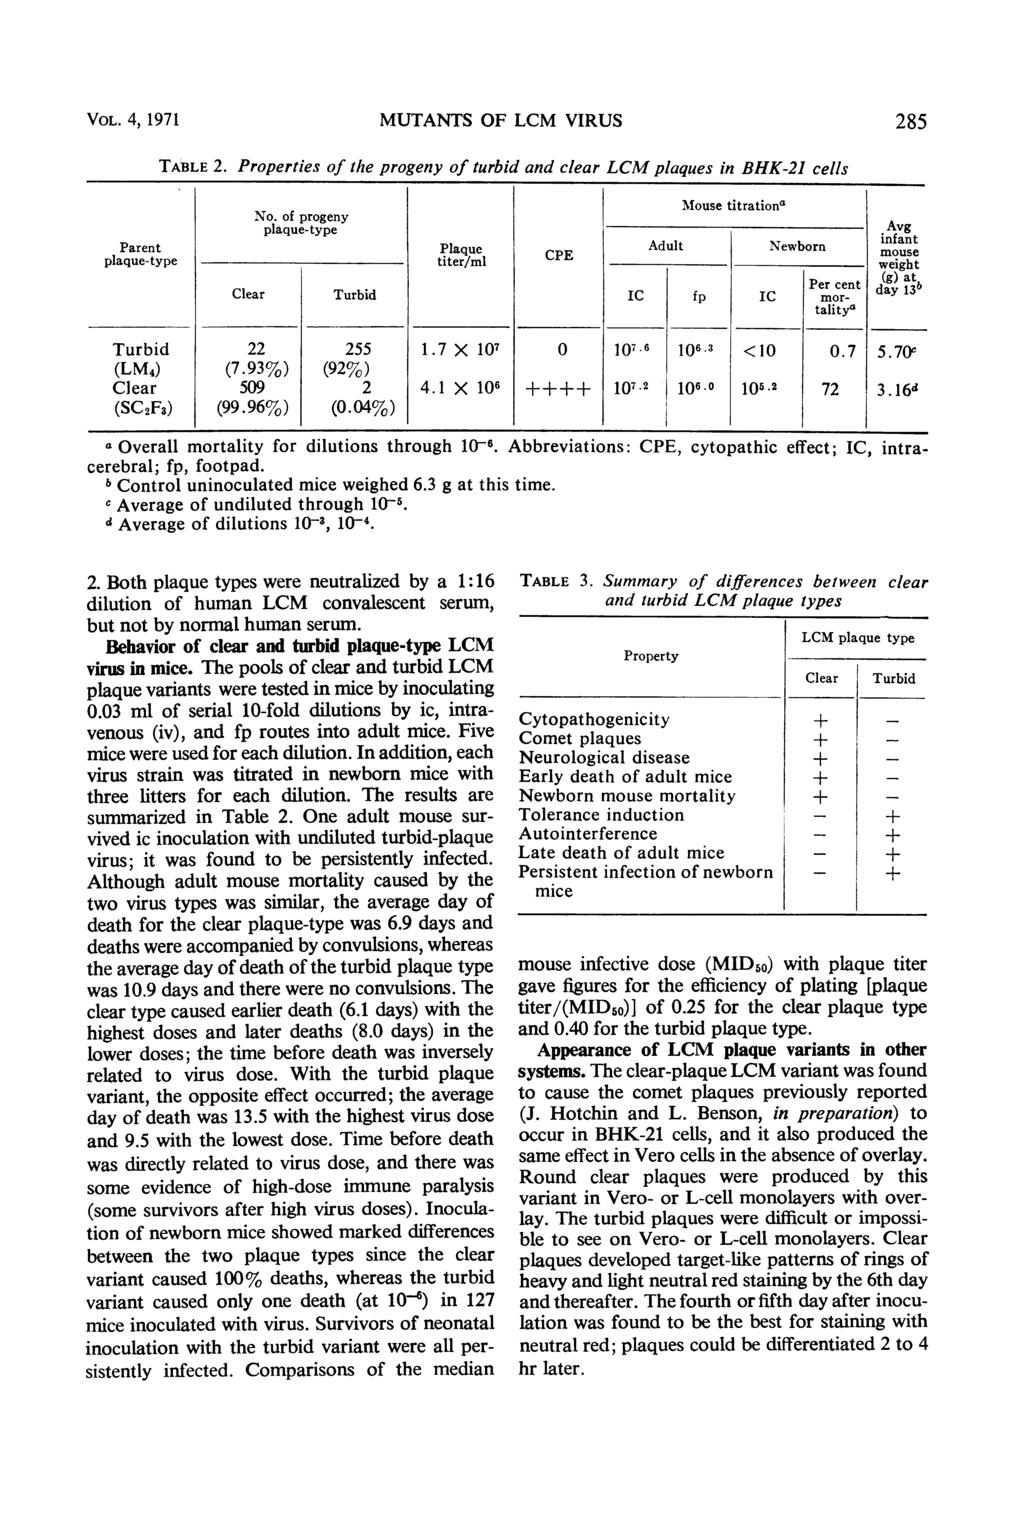 VOL. 4, 1971 MUTANTS OF LCM VIRUS 285 TABLE 2. Properties of tihe progeny of turbid and clear LCM plaques in BHK-21 cells No.